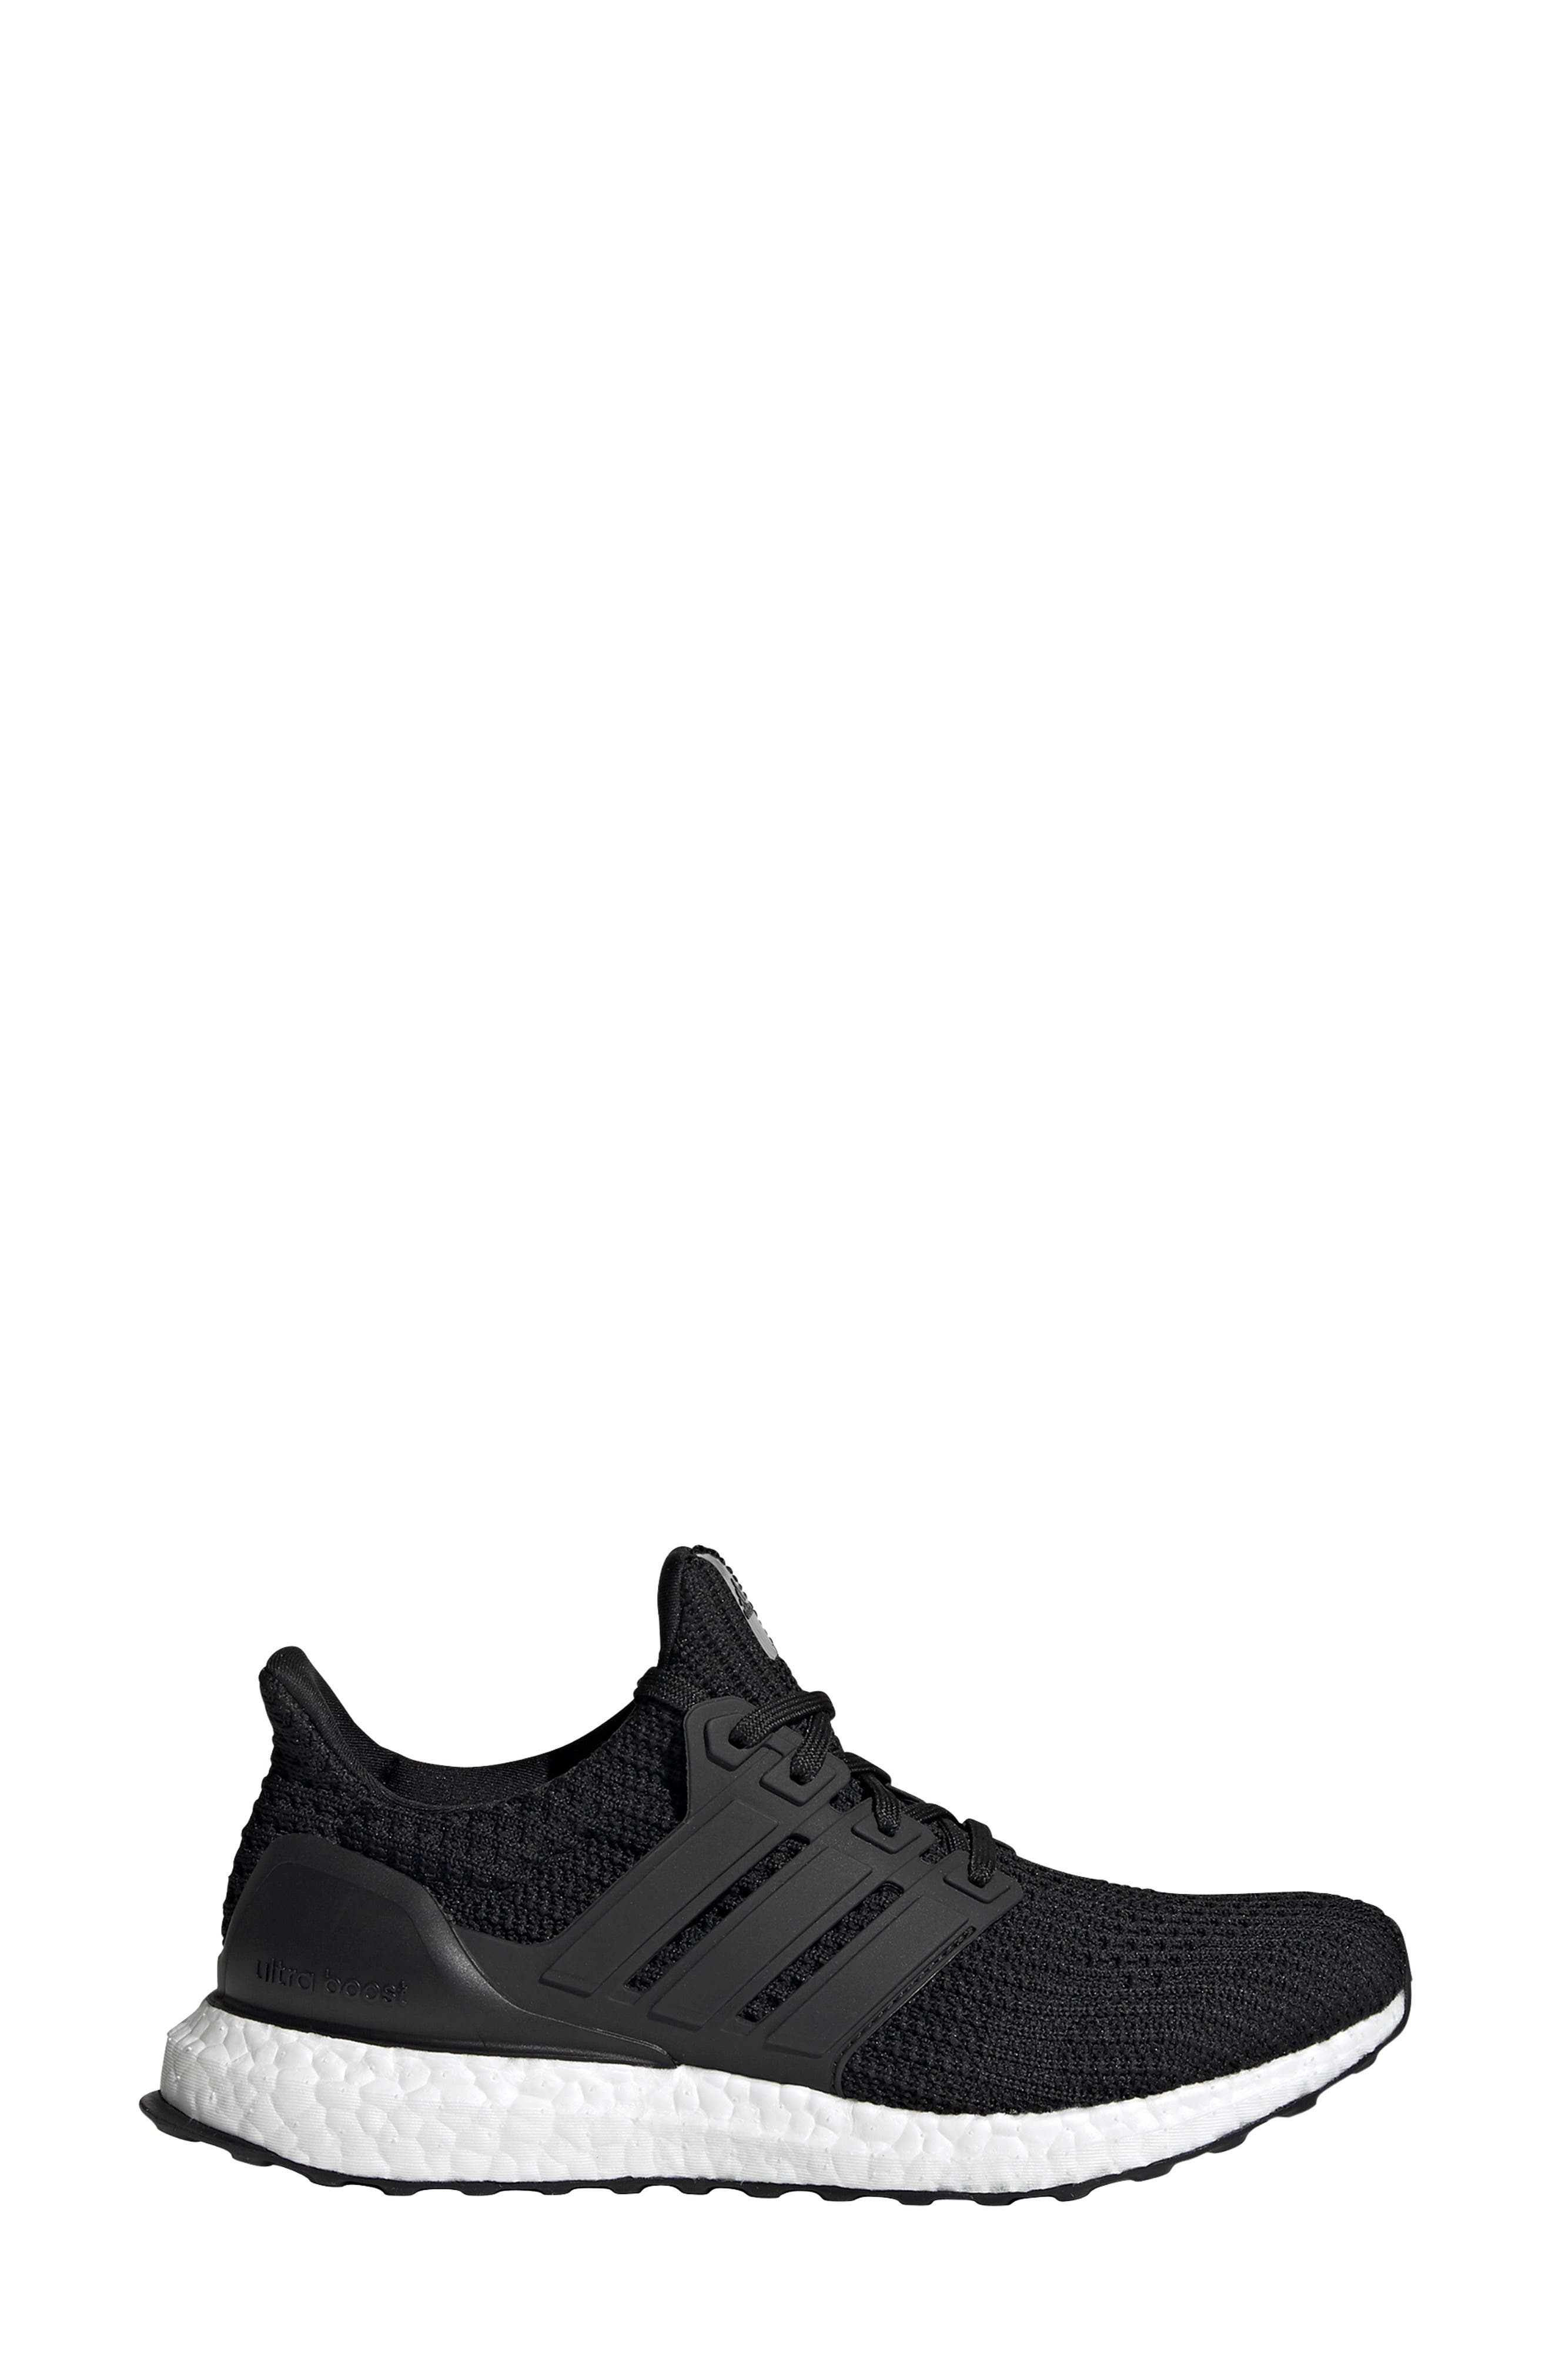 womens ultra boost nordstrom